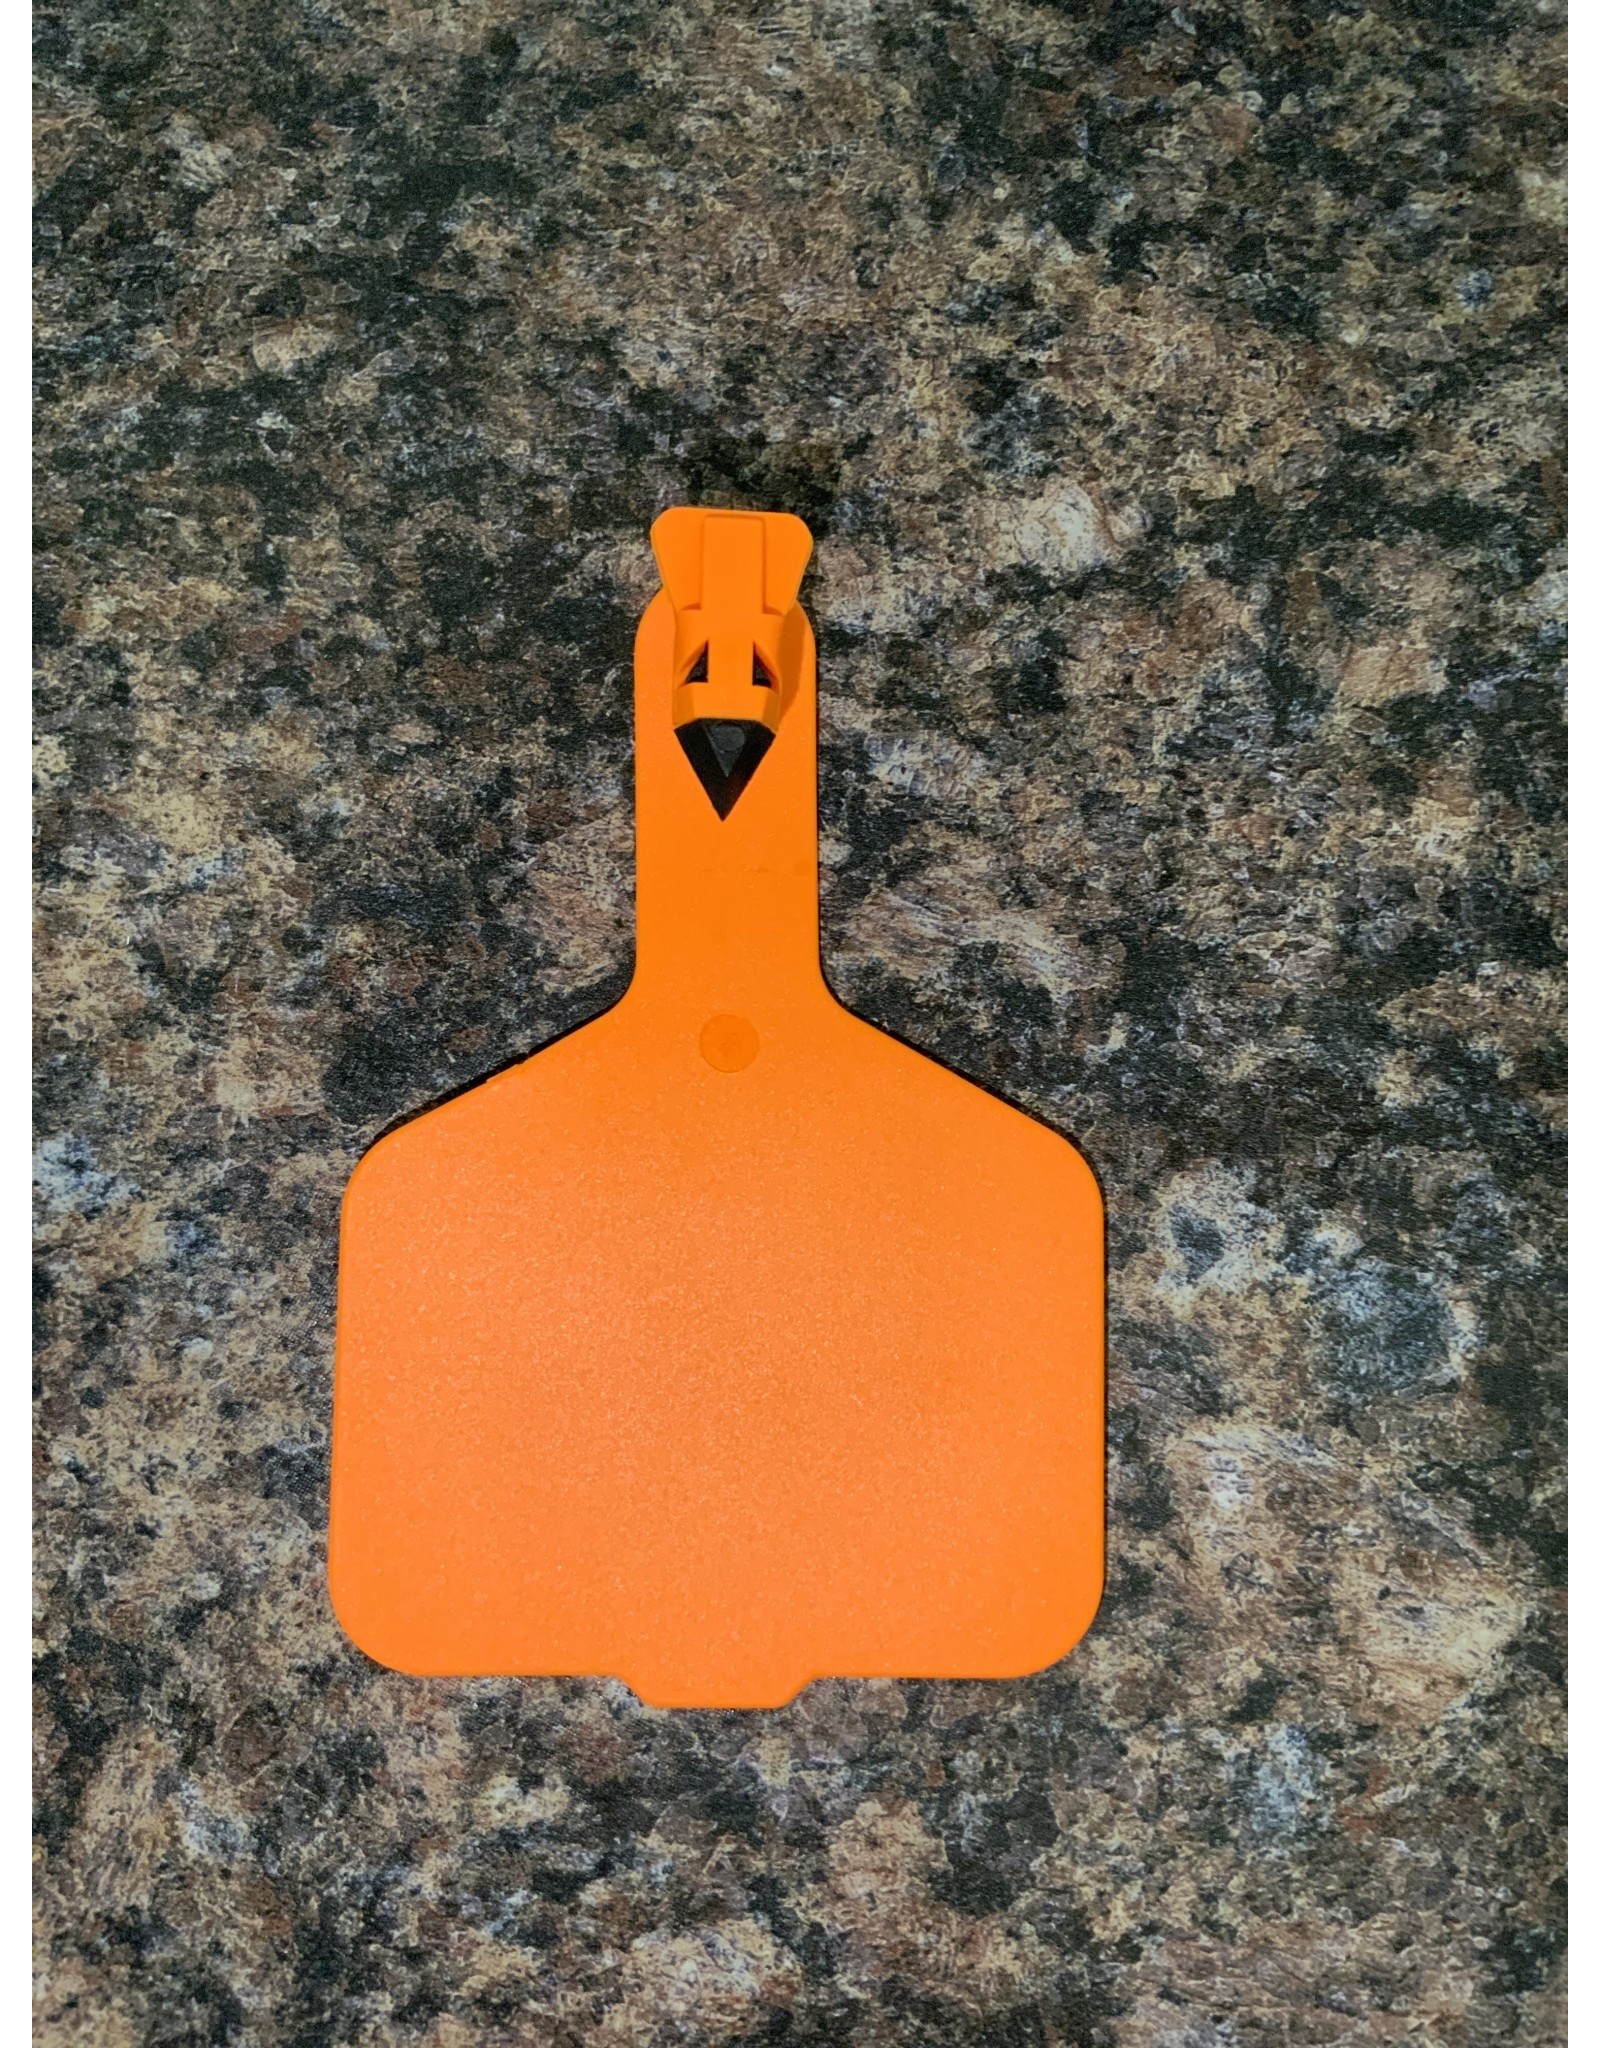 Leader TAG* LEADER 1 PC COW TAGS 25's  - Orange CT6 -75.50 (w) x 114.00 (h) x 21.05 (d) mm